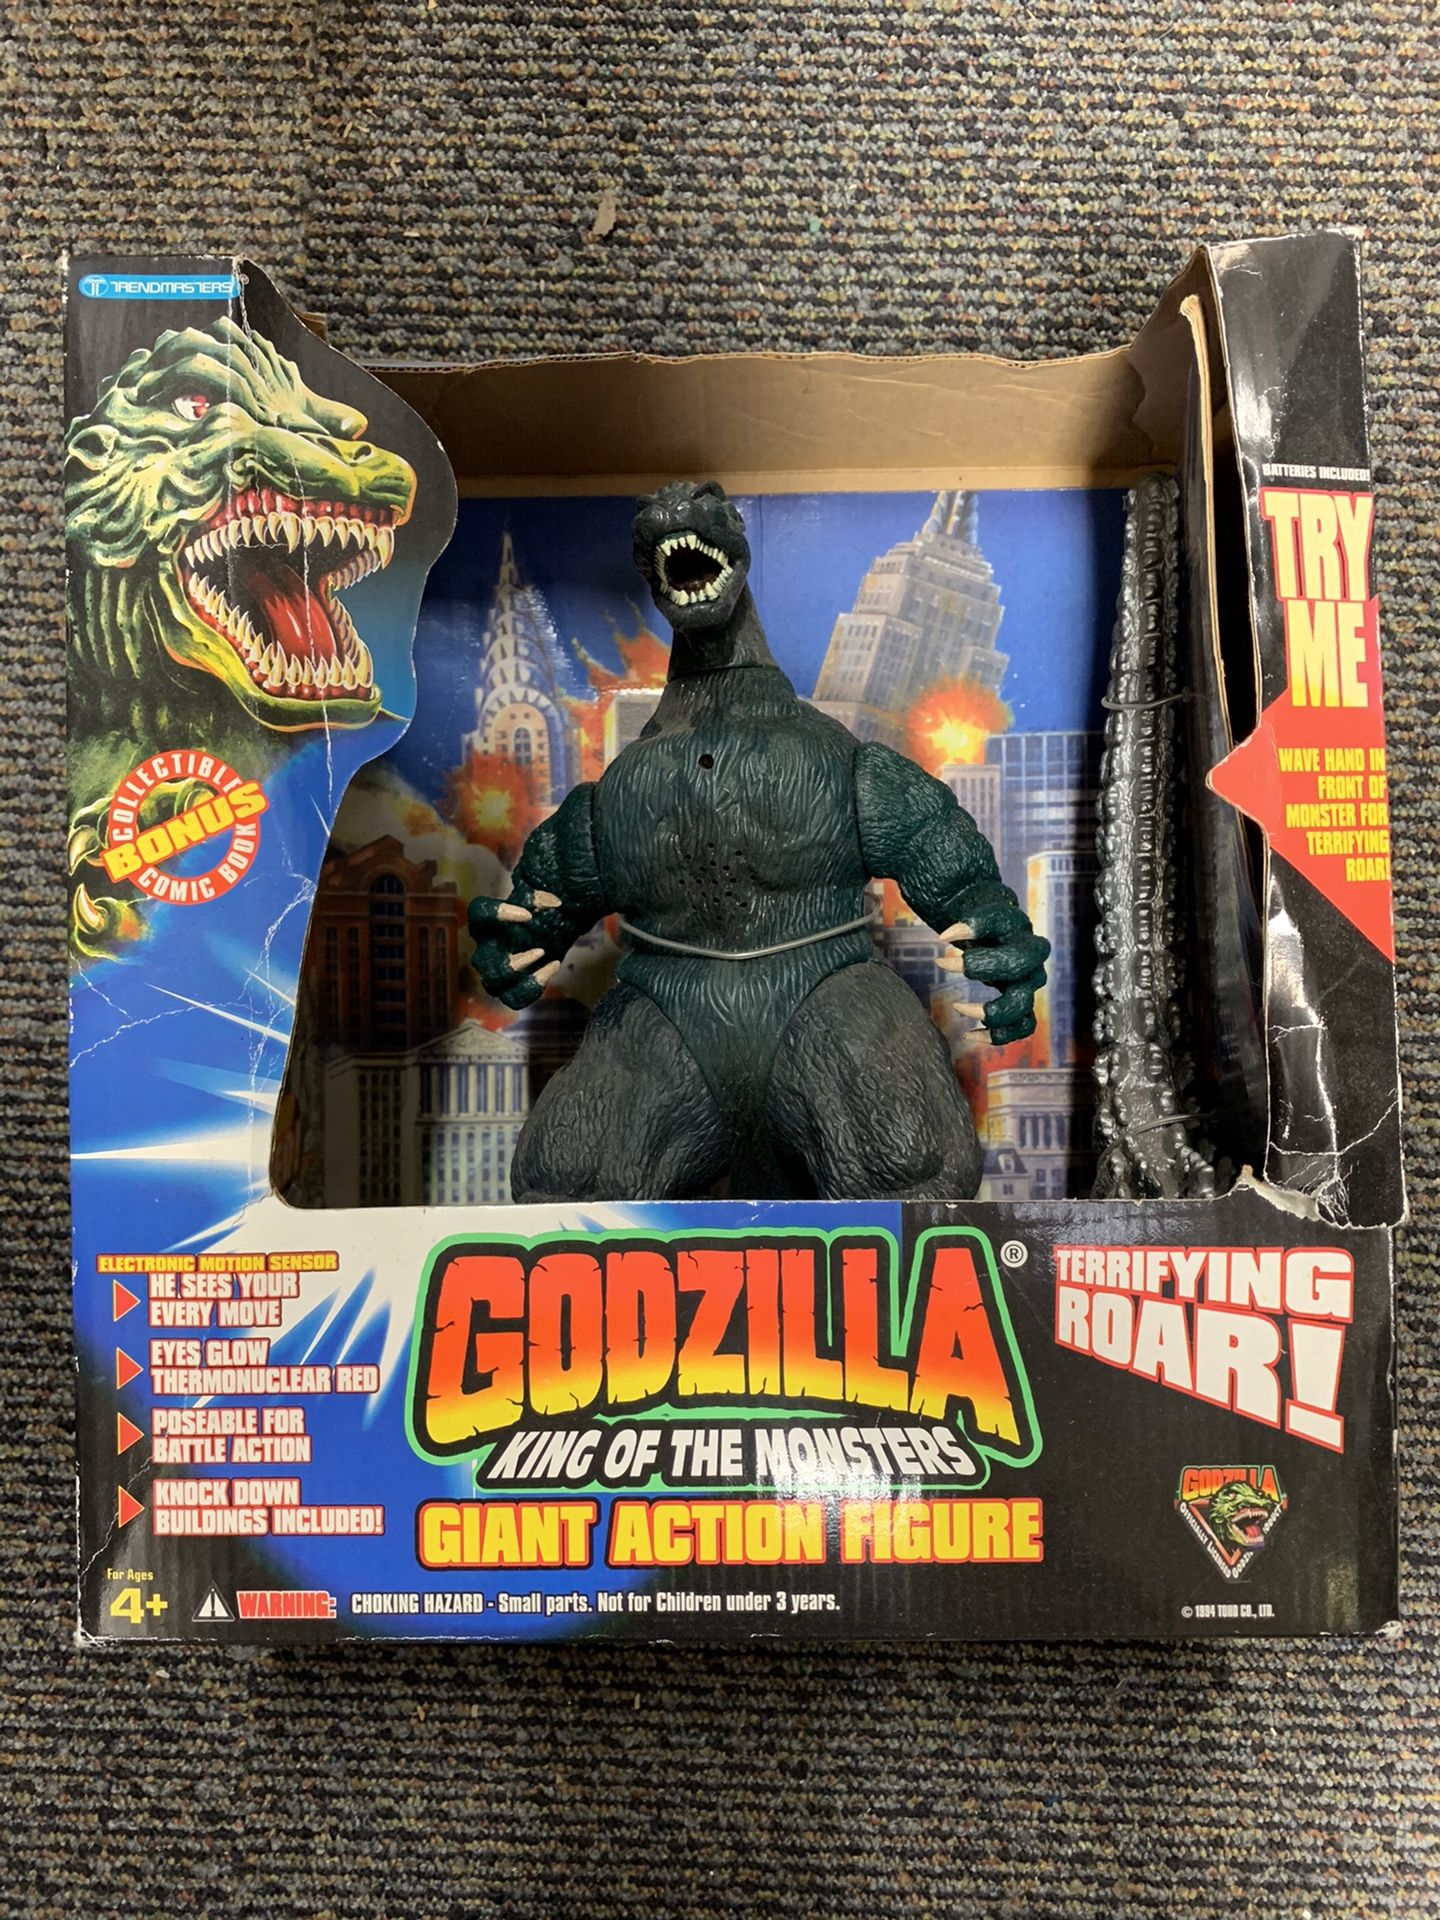 Vintage 1994 Trendmasters Godzilla King of The Monsters Giant Action Figure